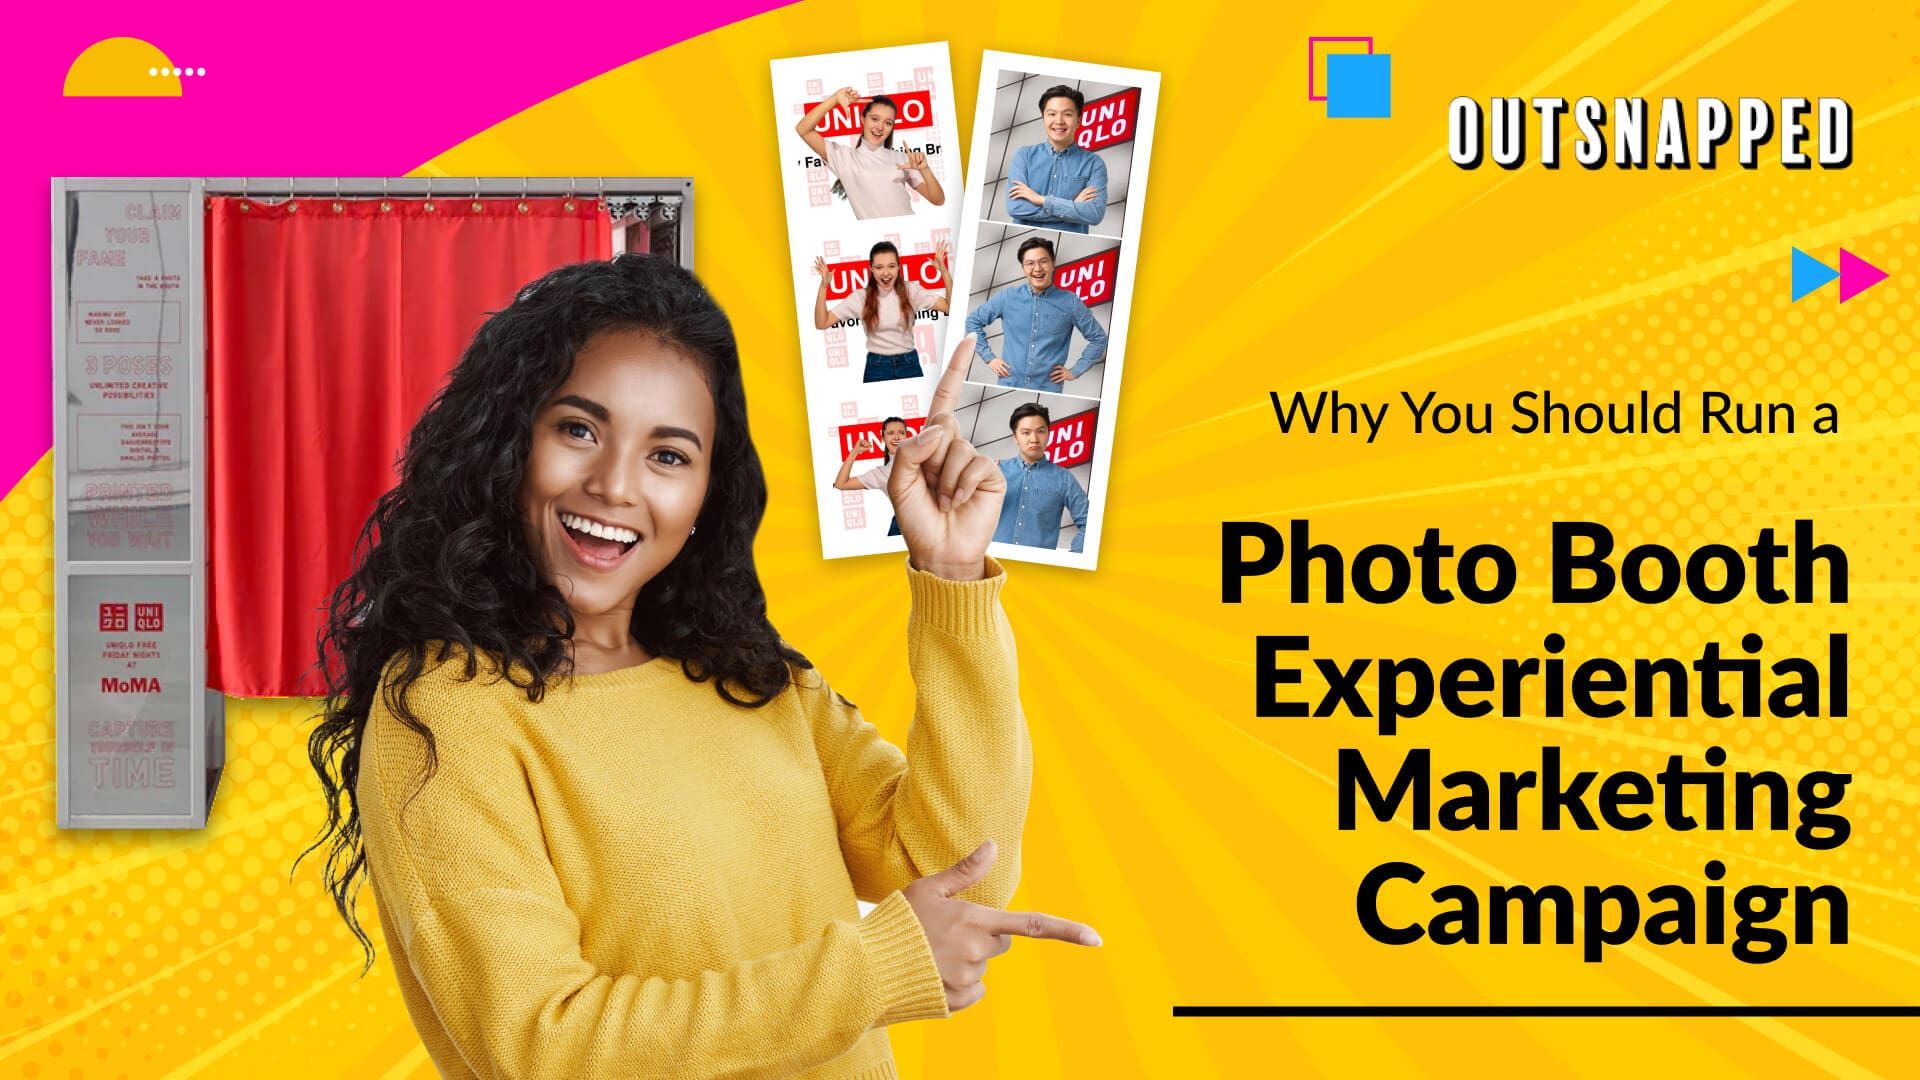 Why you should run a photo booth experiential marketing campaign